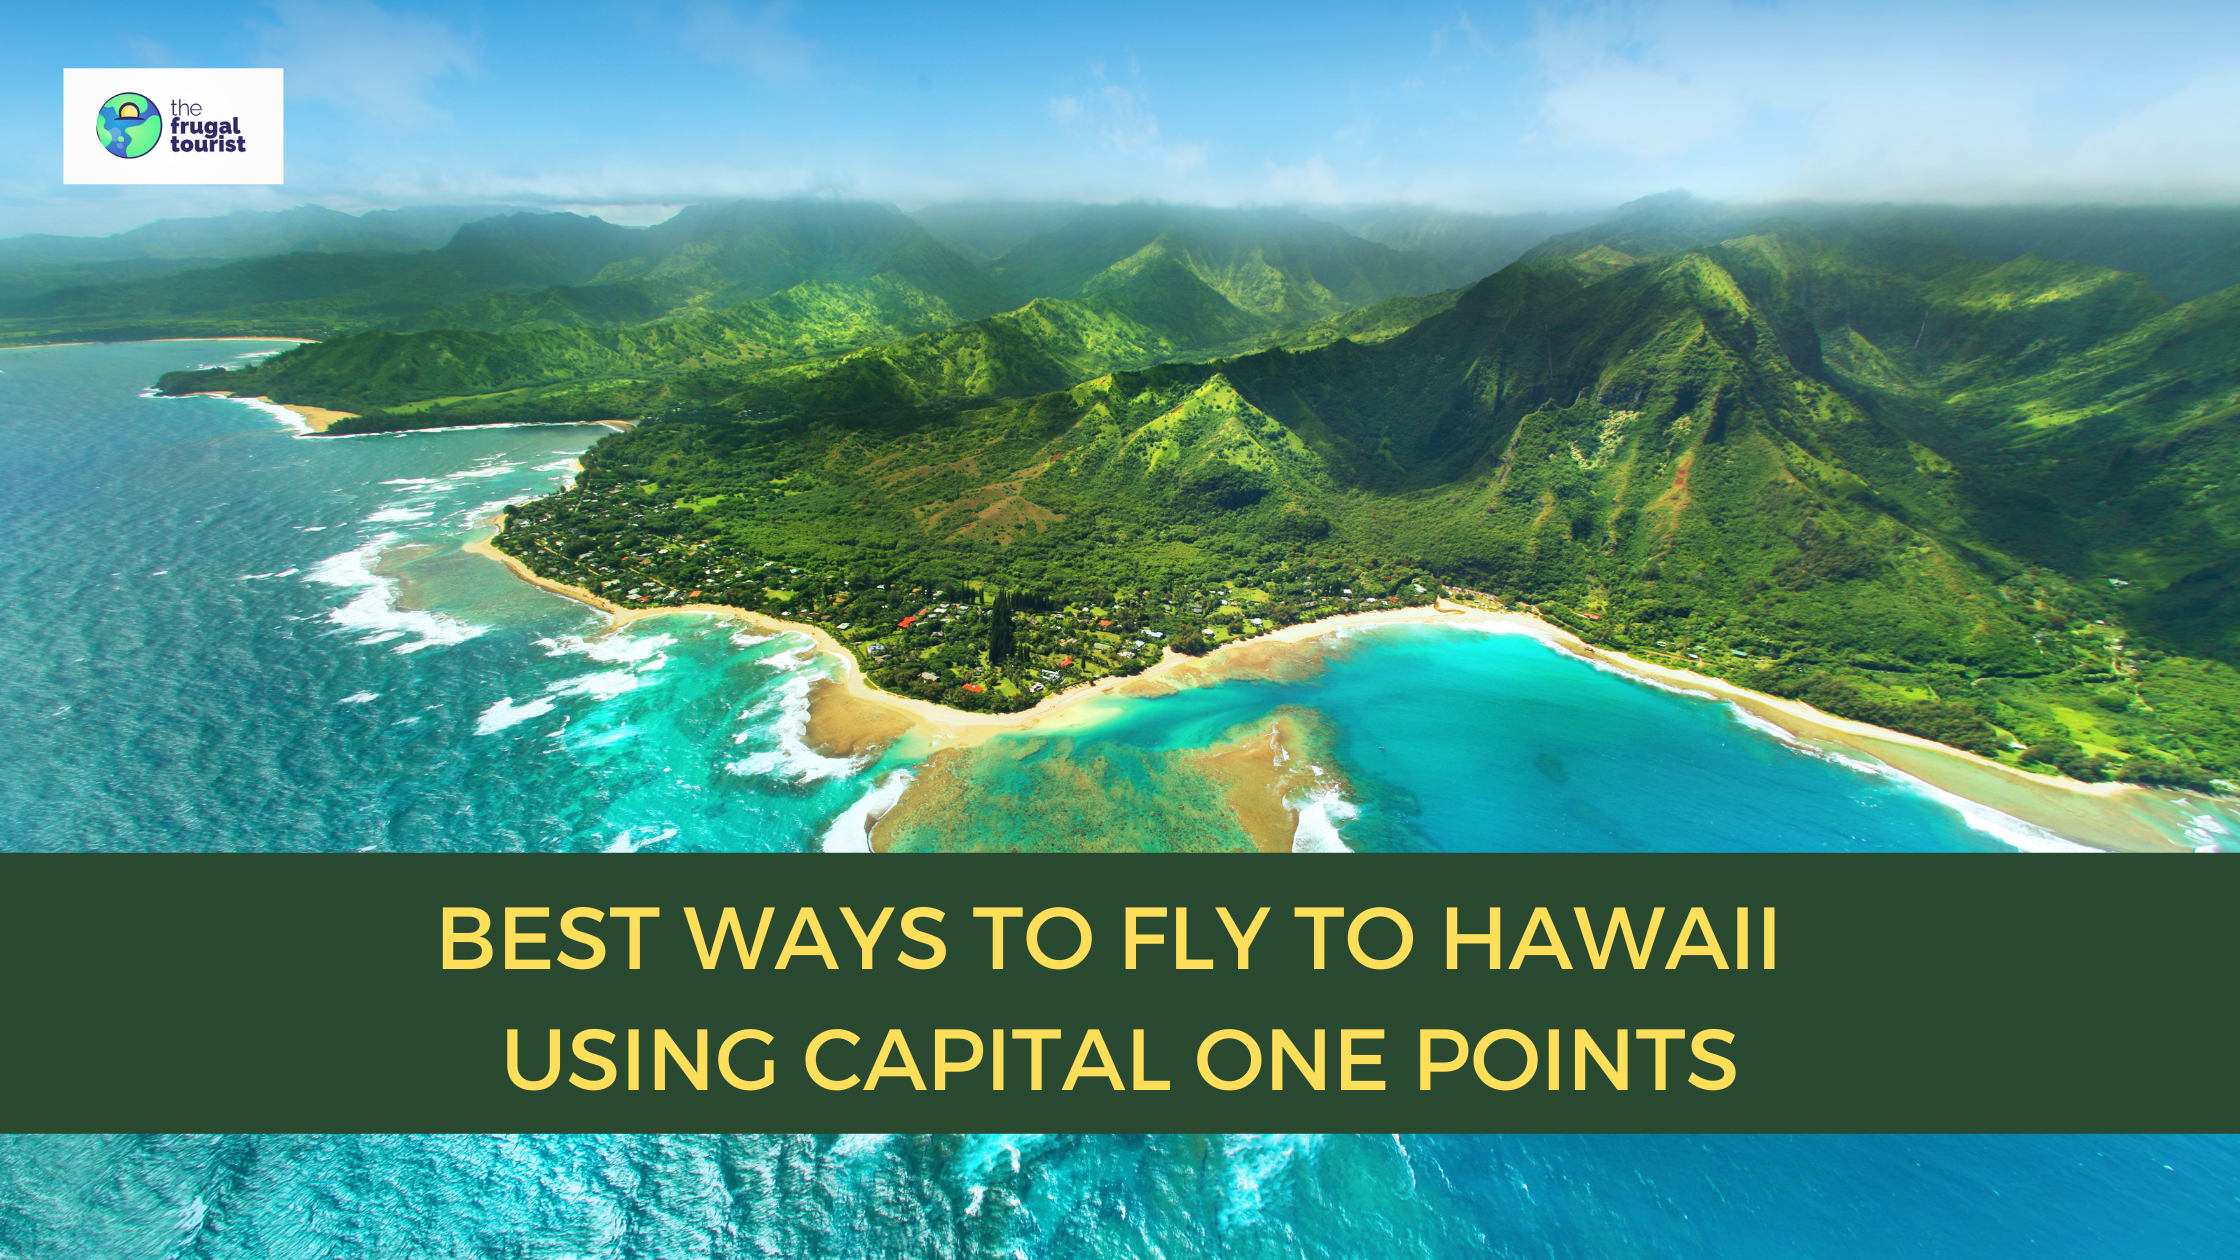 Best Ways to Fly to Hawaii Using Capital One Points